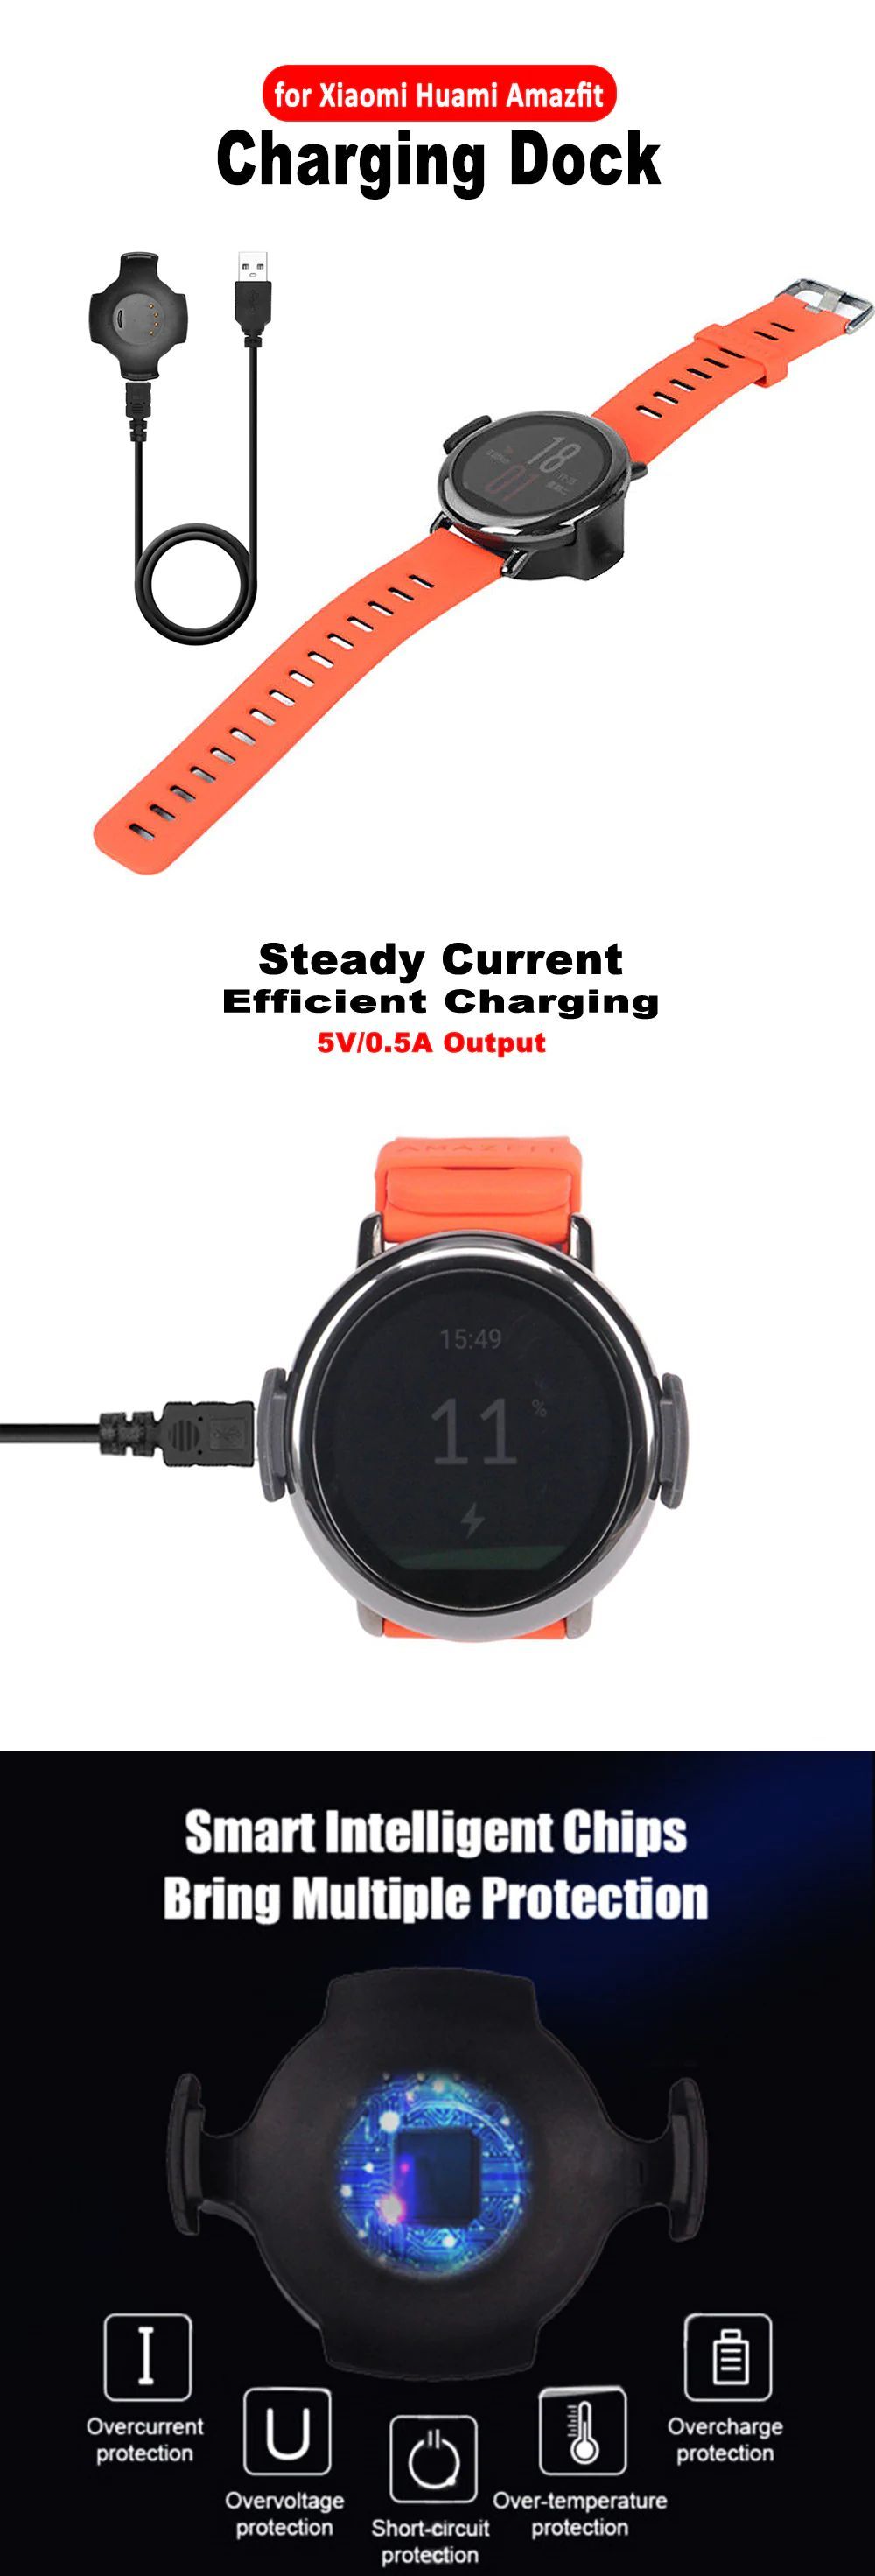 Amazfit Pace Usb Charging Cable (1)